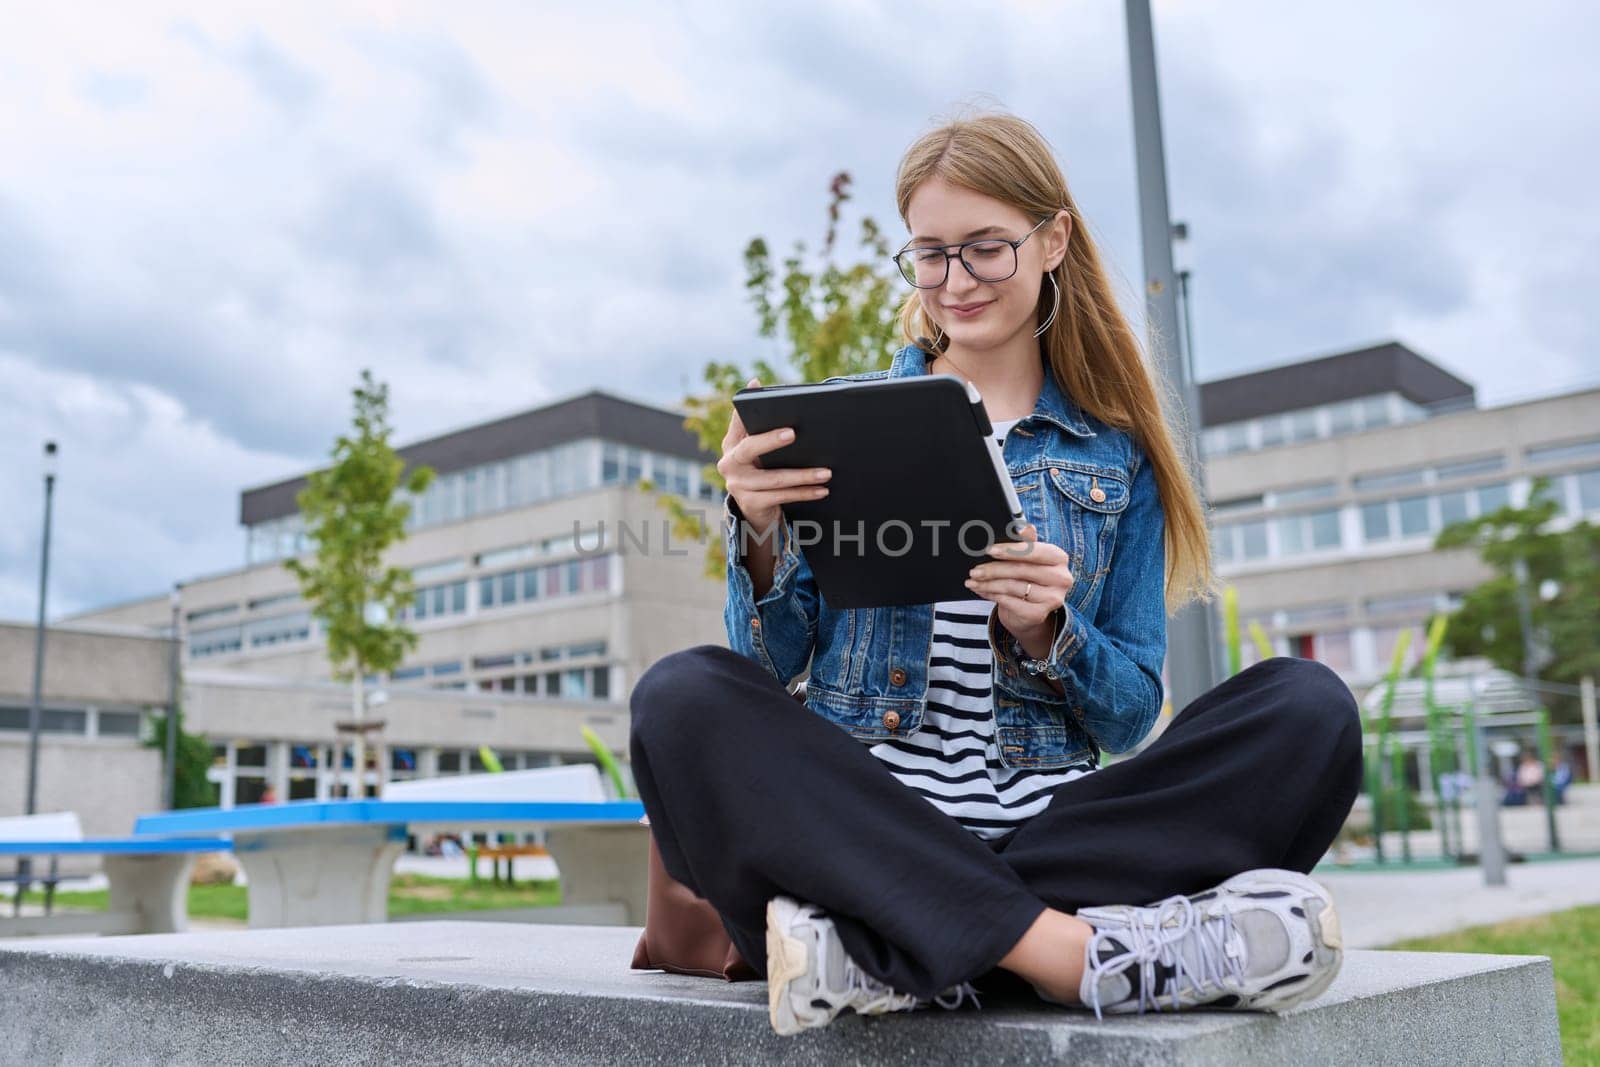 Girl student teenager outdoor near school building. Smiling teenage female with backpack, looking at screen of digital tablet. Adolescence, education, learning concept